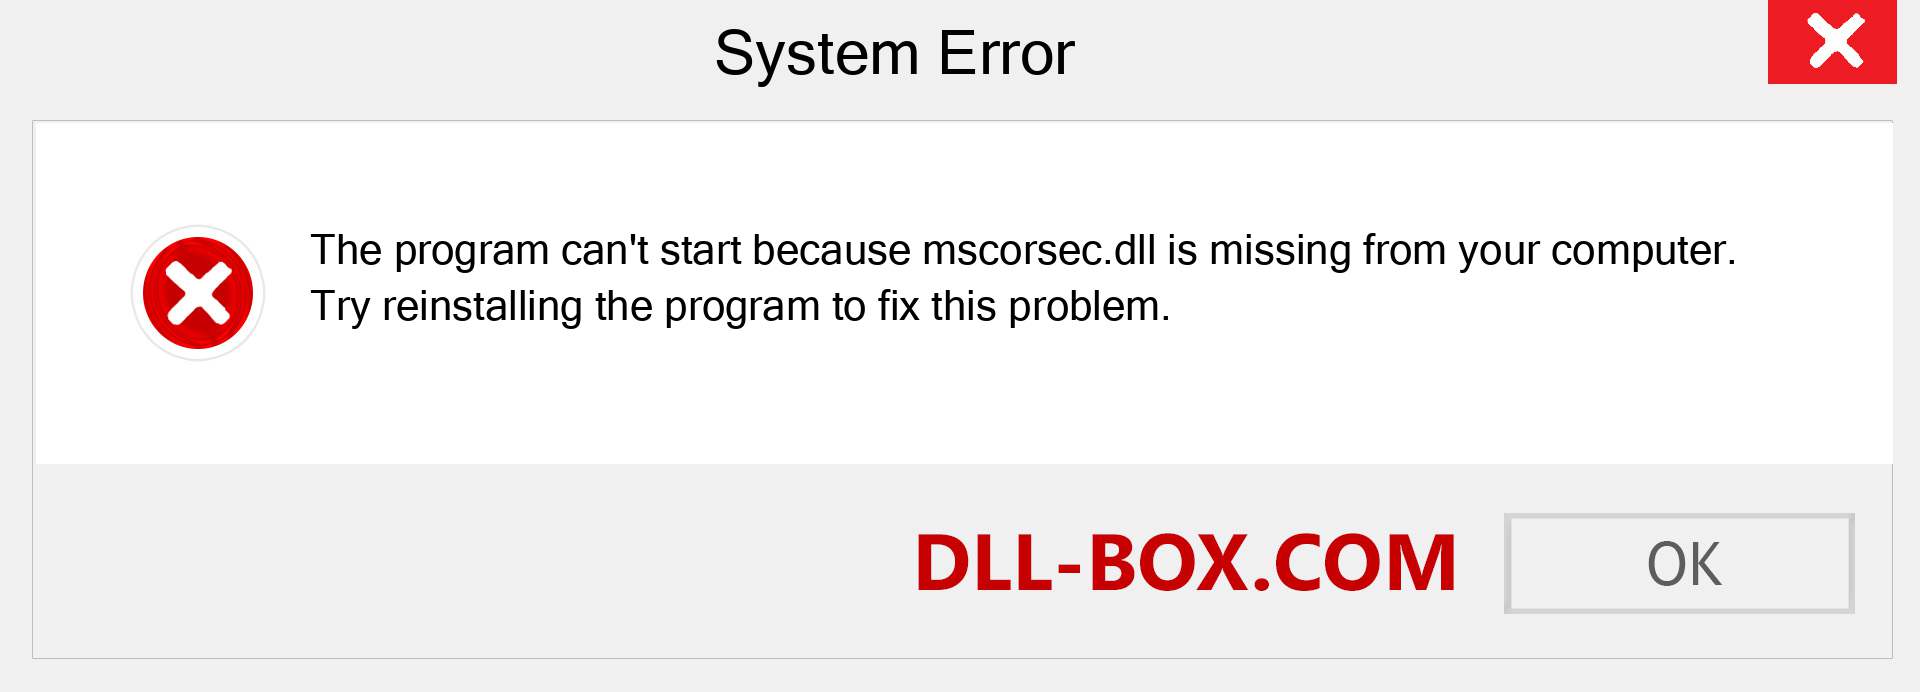  mscorsec.dll file is missing?. Download for Windows 7, 8, 10 - Fix  mscorsec dll Missing Error on Windows, photos, images